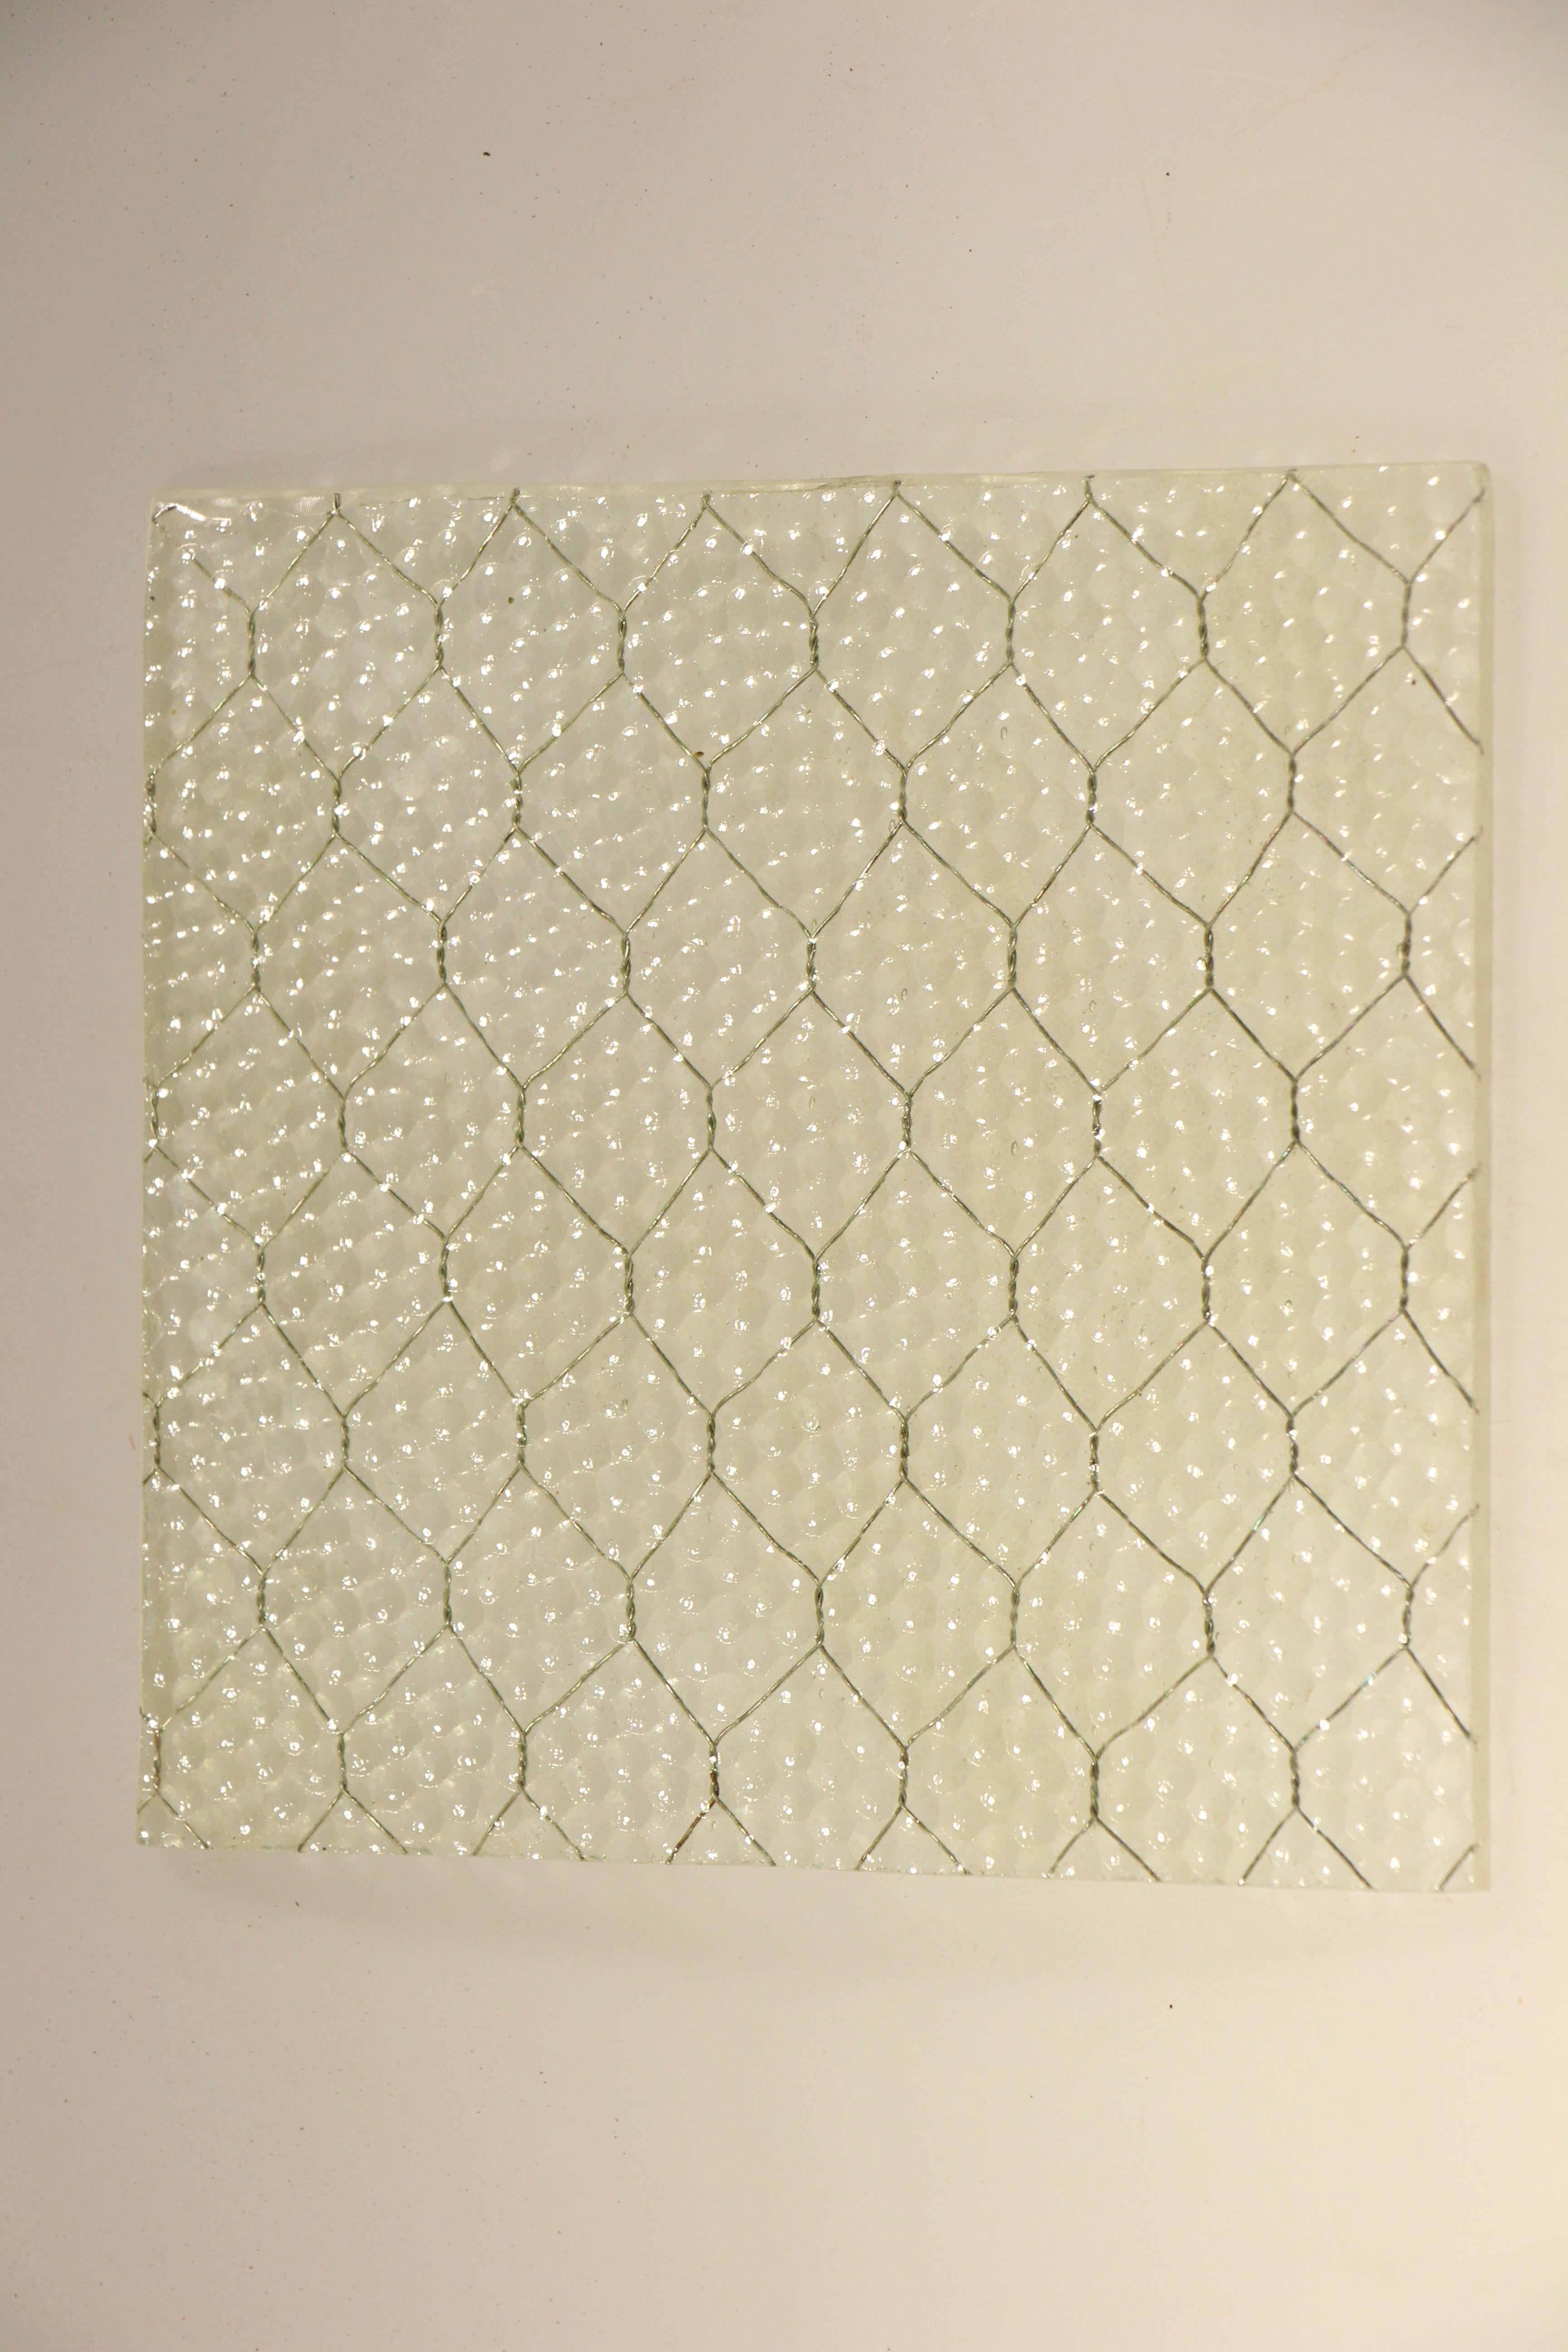 American Custom Order 1920s 'Pebbled' Vintage Chicken Wire Glass